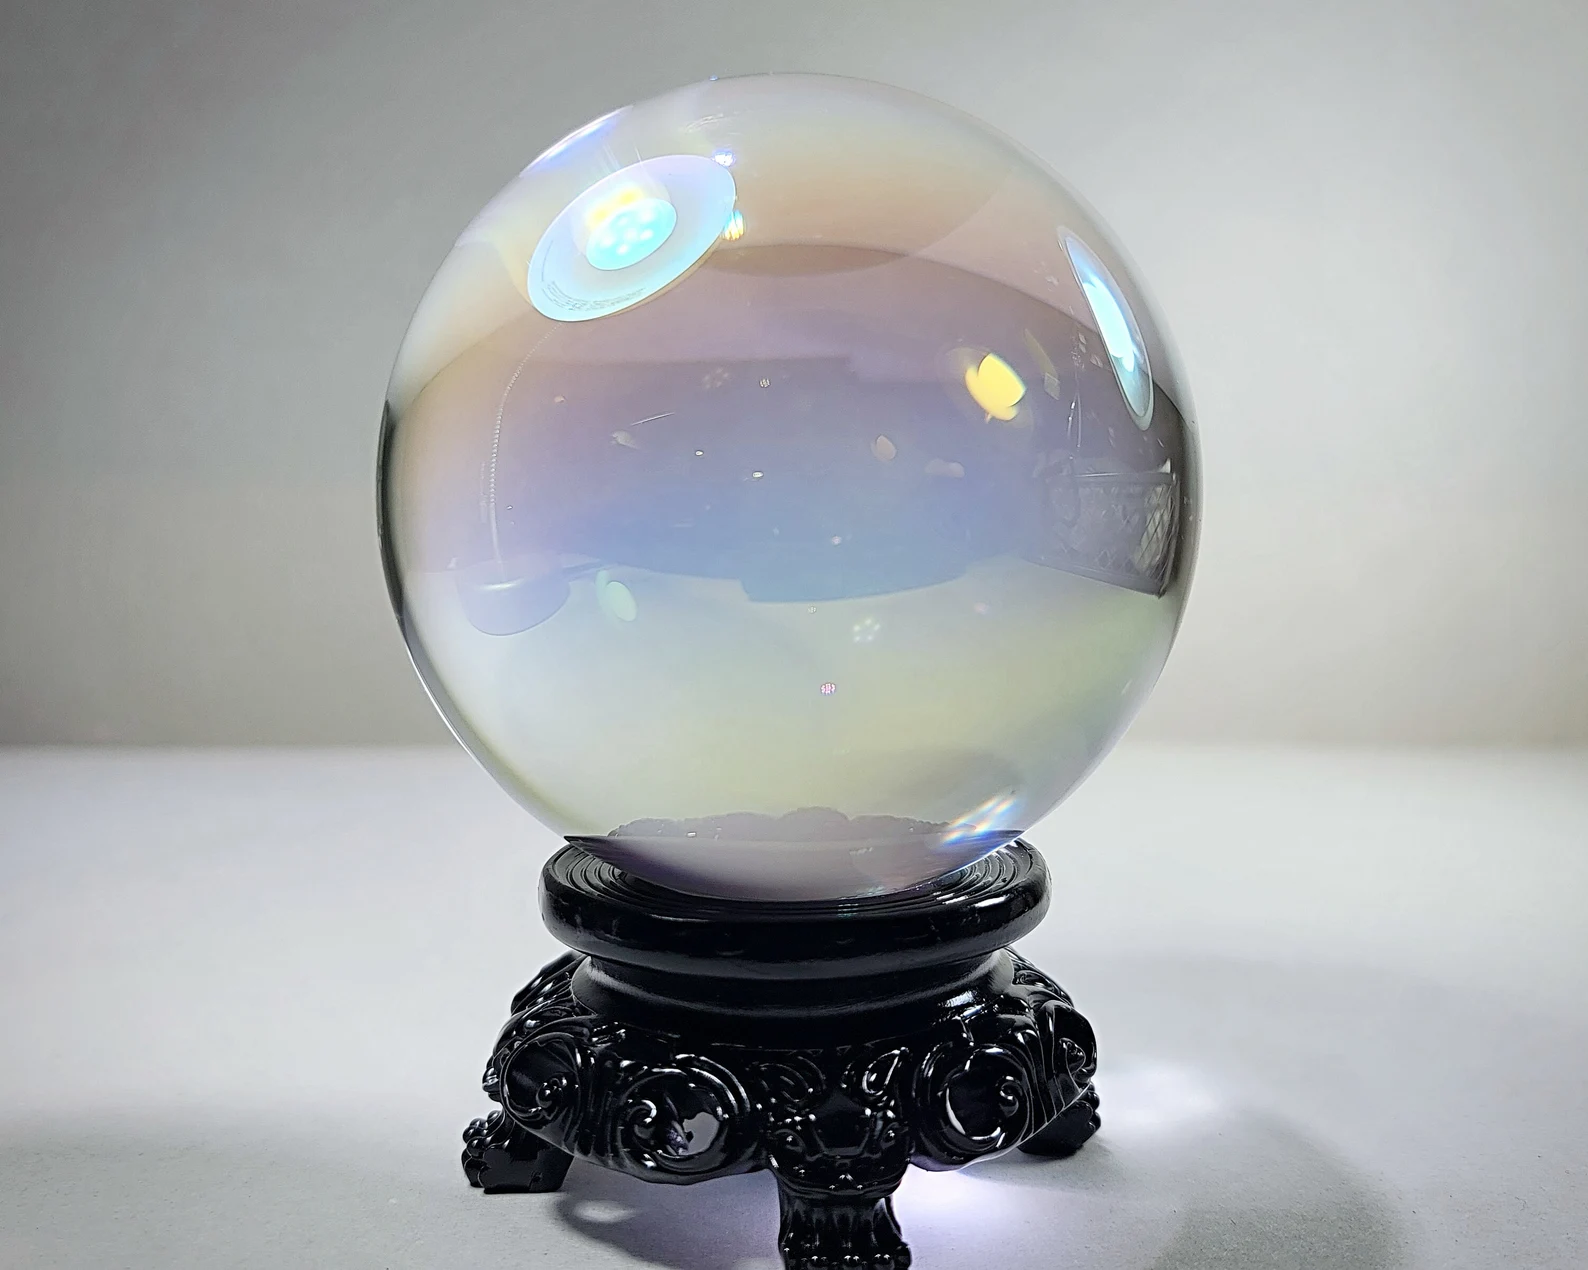 Aurora rainbow glass crystal ball is a beautiful addition to any altar and spiritual divination practice